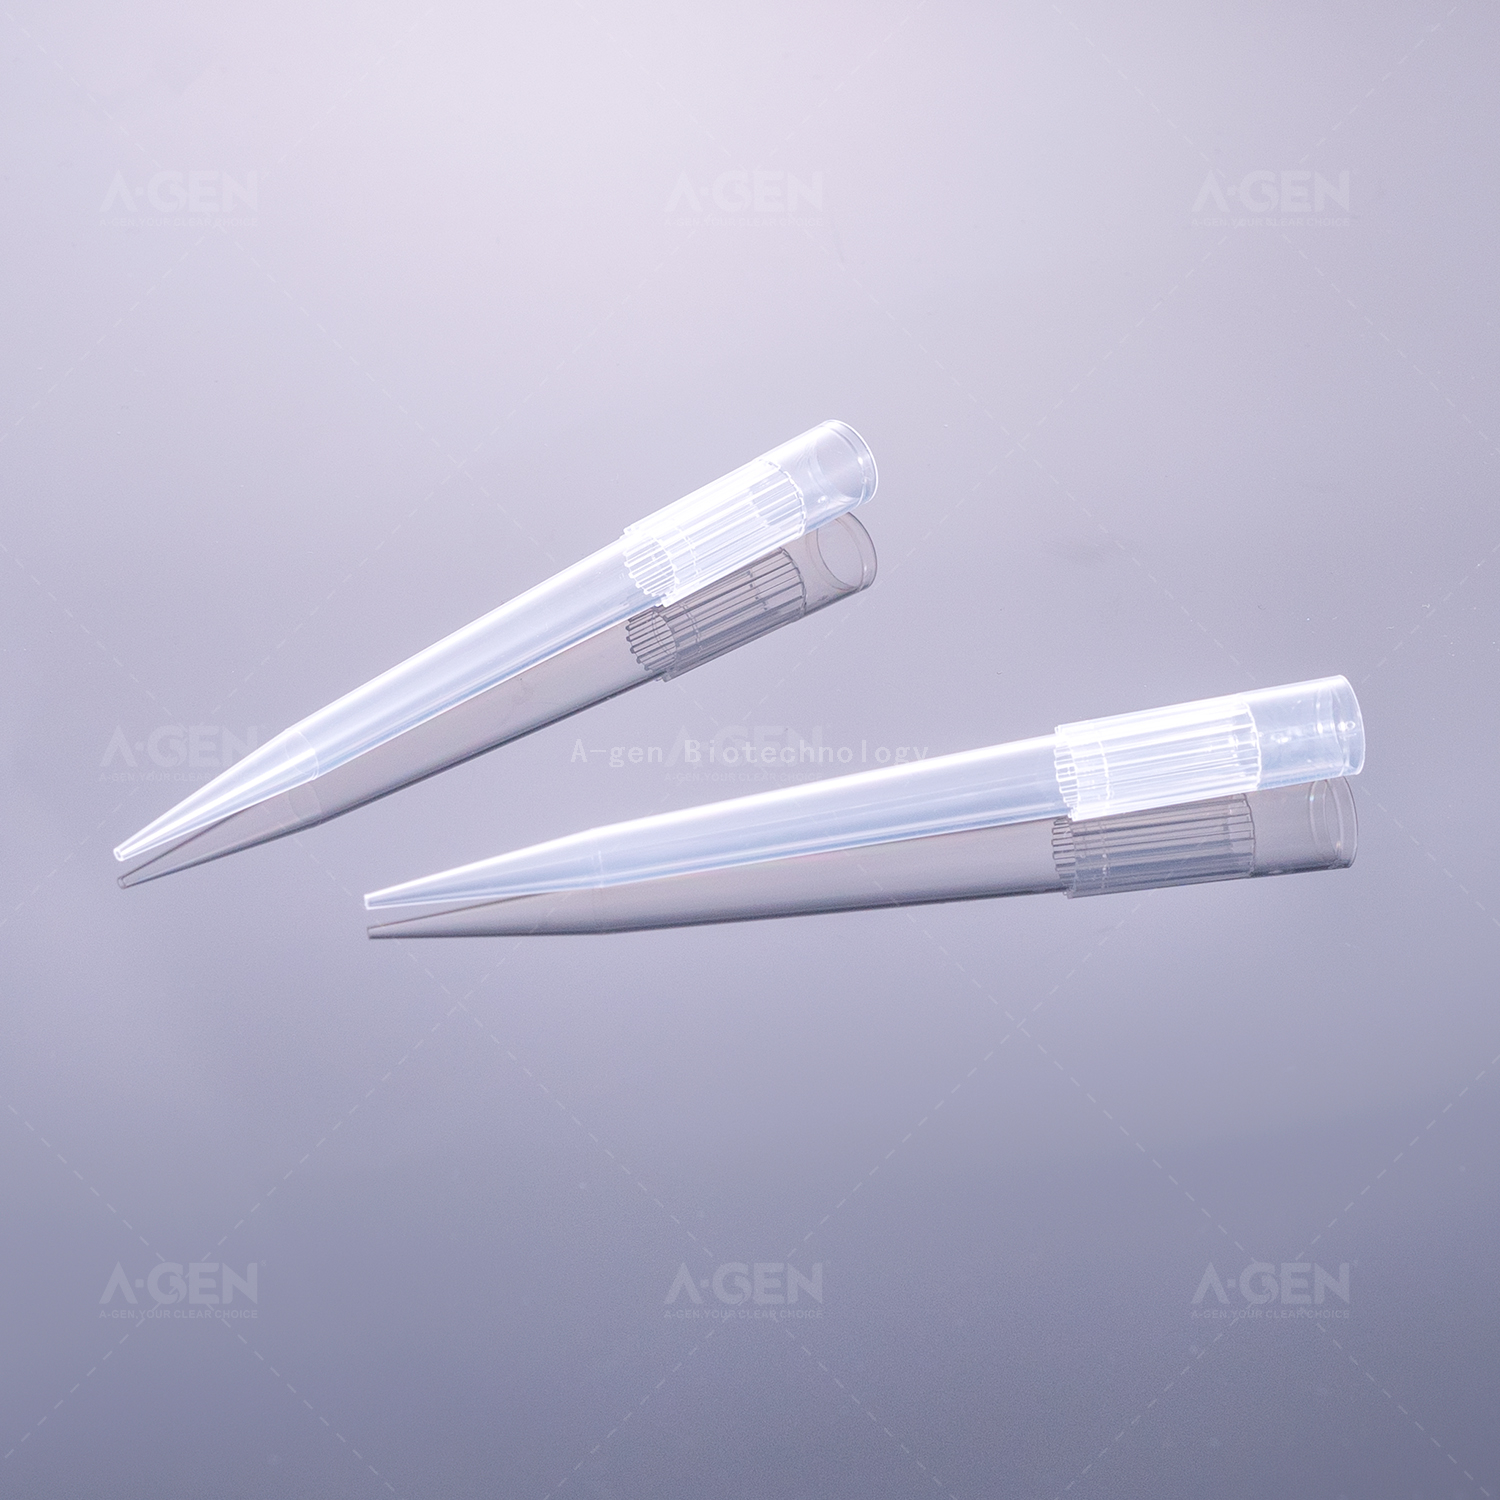 LTS Rainin 1000μL Transparent Pipette Tips with Packed in Reload System